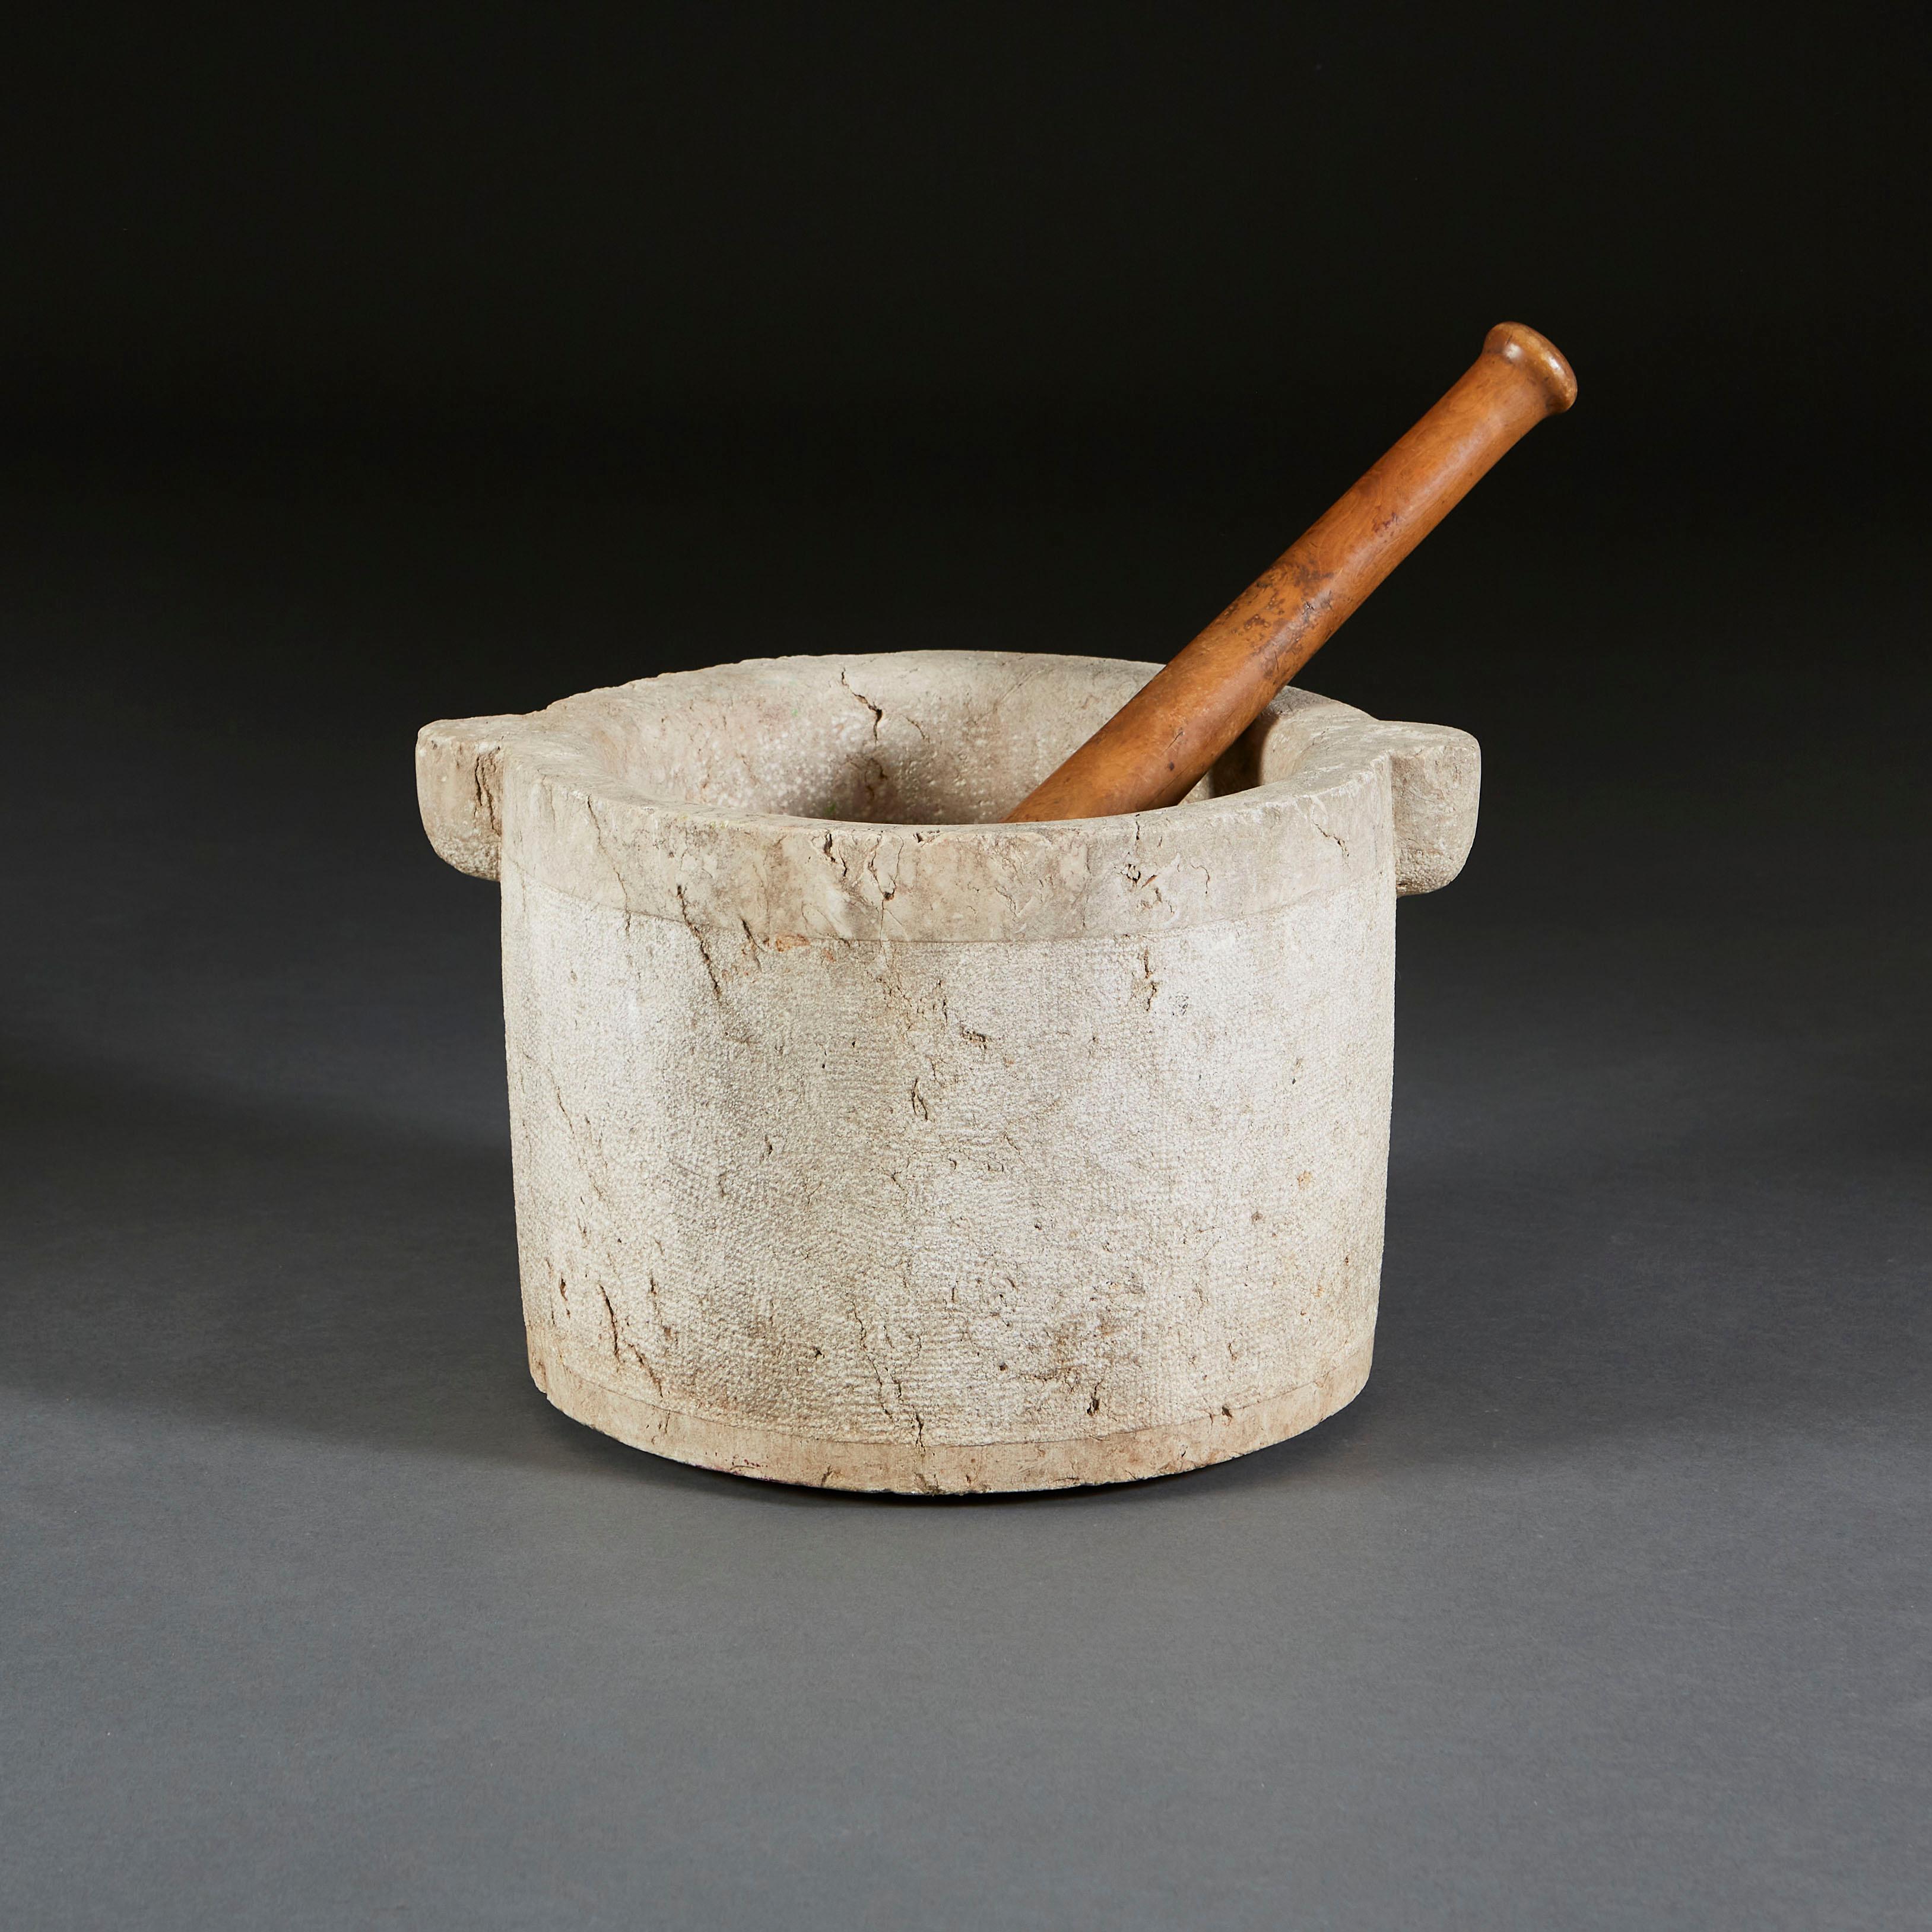 A mid-nineteenth century pestle and mortar of large scale, the mortar in stone with carrying handles to each side, accompanied by carved wooden pestle.